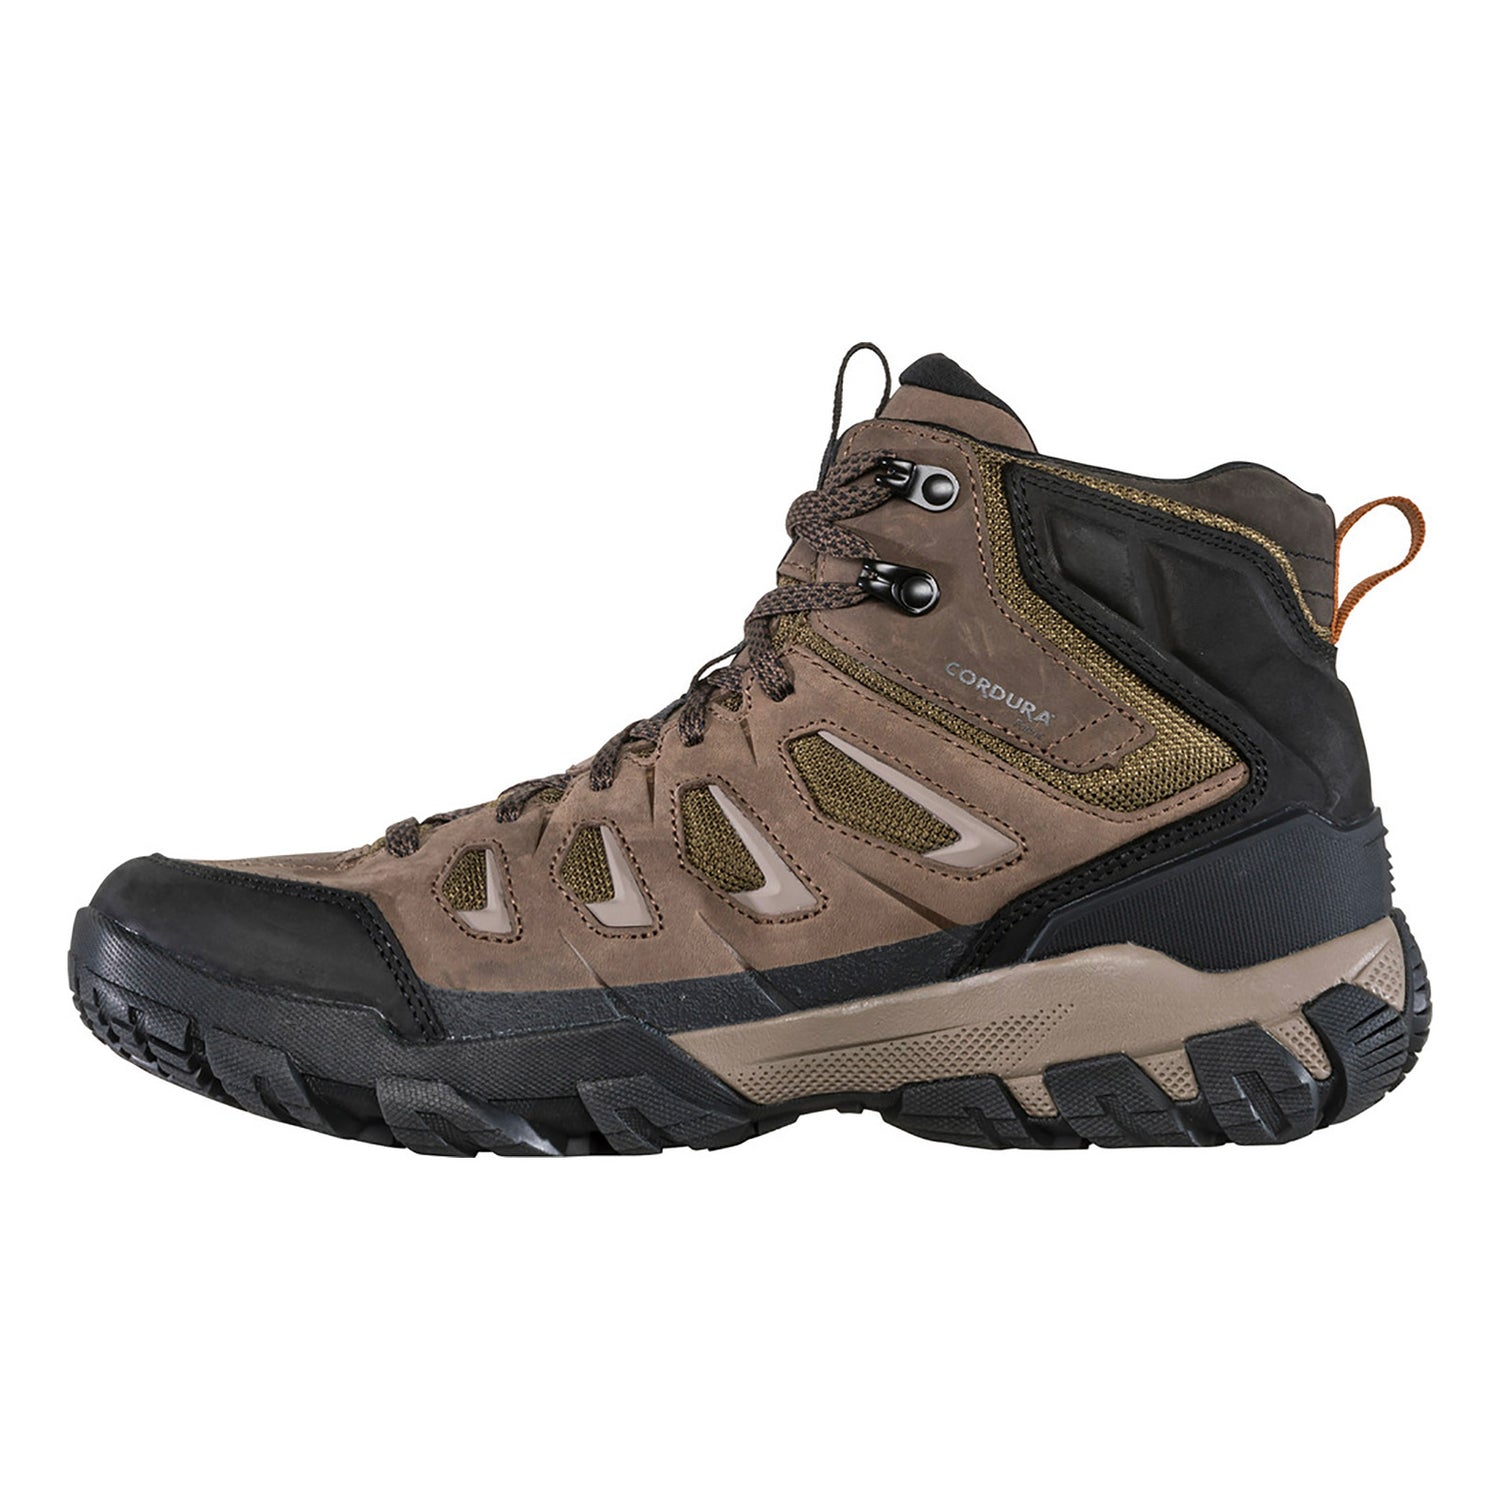 Oboz Sawtooth X Mid Waterproof Hiking Boots Review 